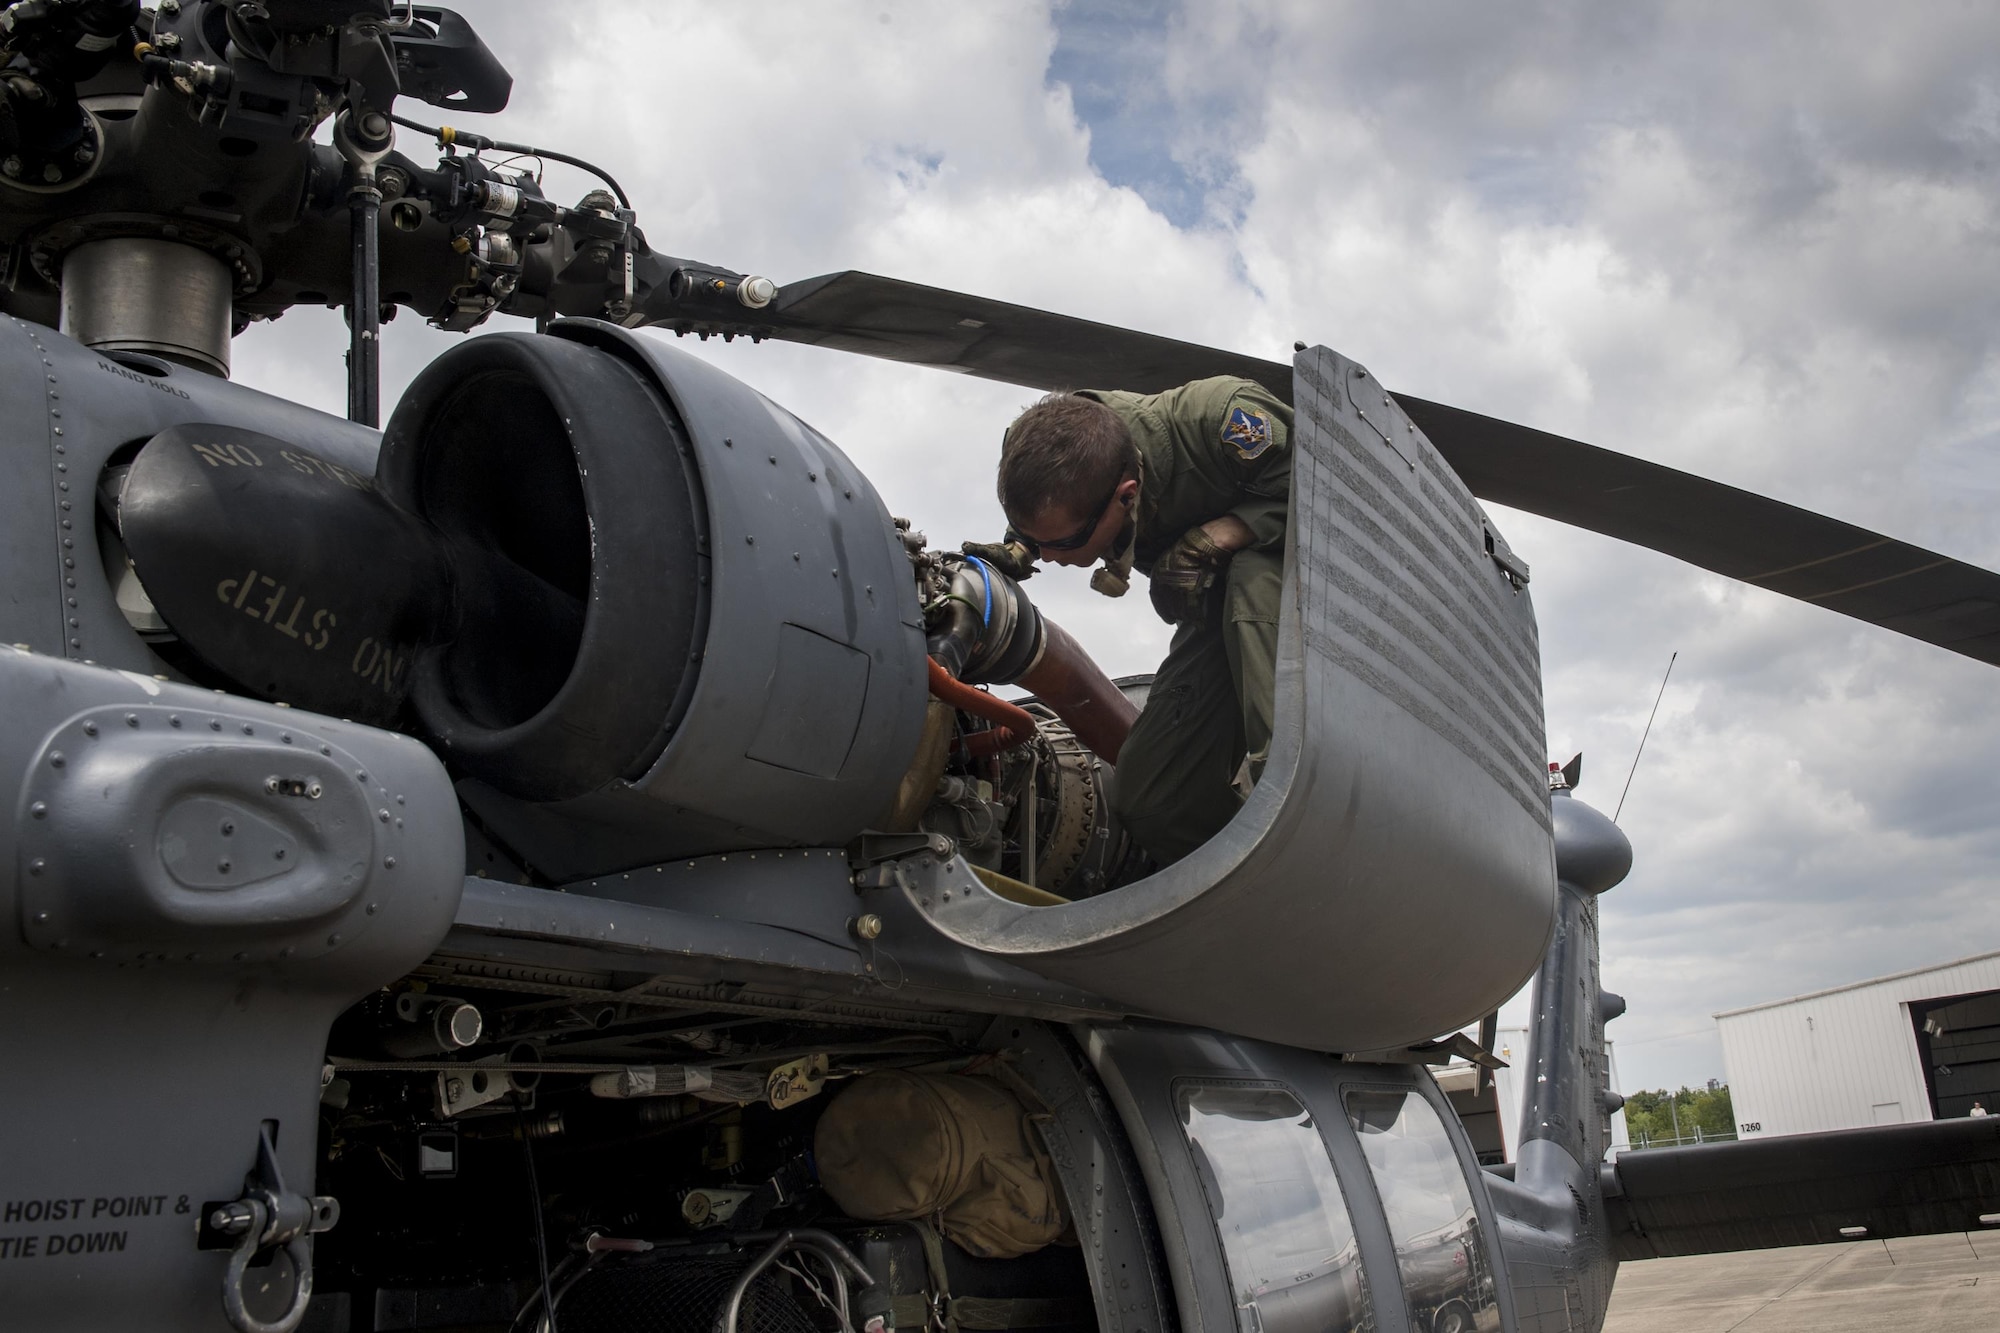 A special missions aviator from the 41st Rescue Squadron, inspects an engine on an HH-60G Pave Hawk, Aug. 30, 2017, at Easterwood Airport in College Station, Texas.